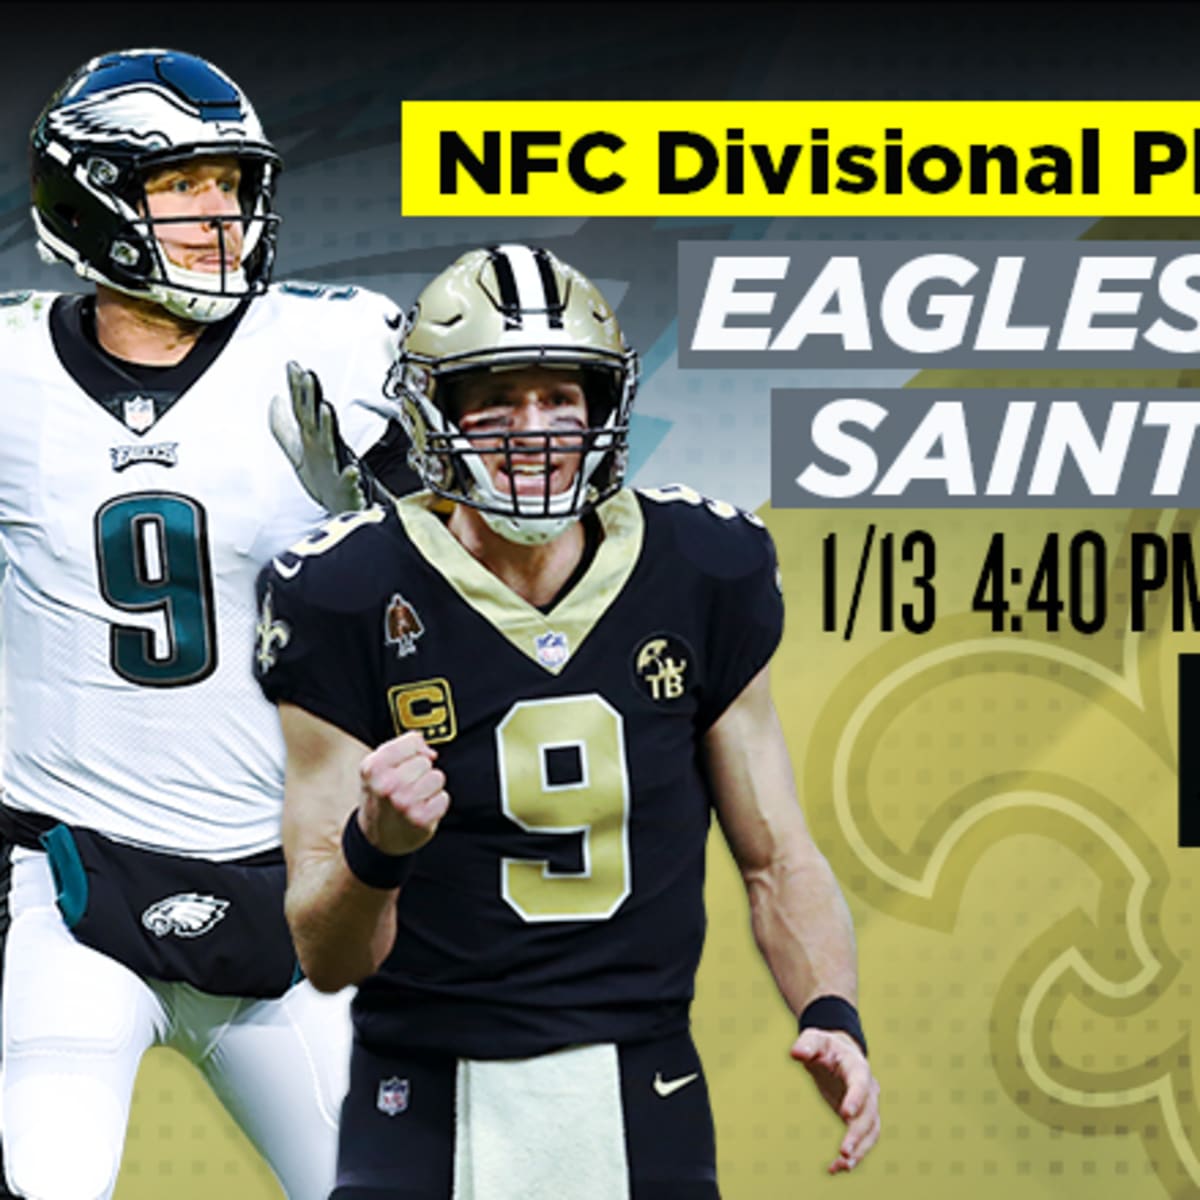 New Orleans Saints rally to defeat the Philadelphia Eagles and advance to  NFC Championship game: Game recap, score, stats 